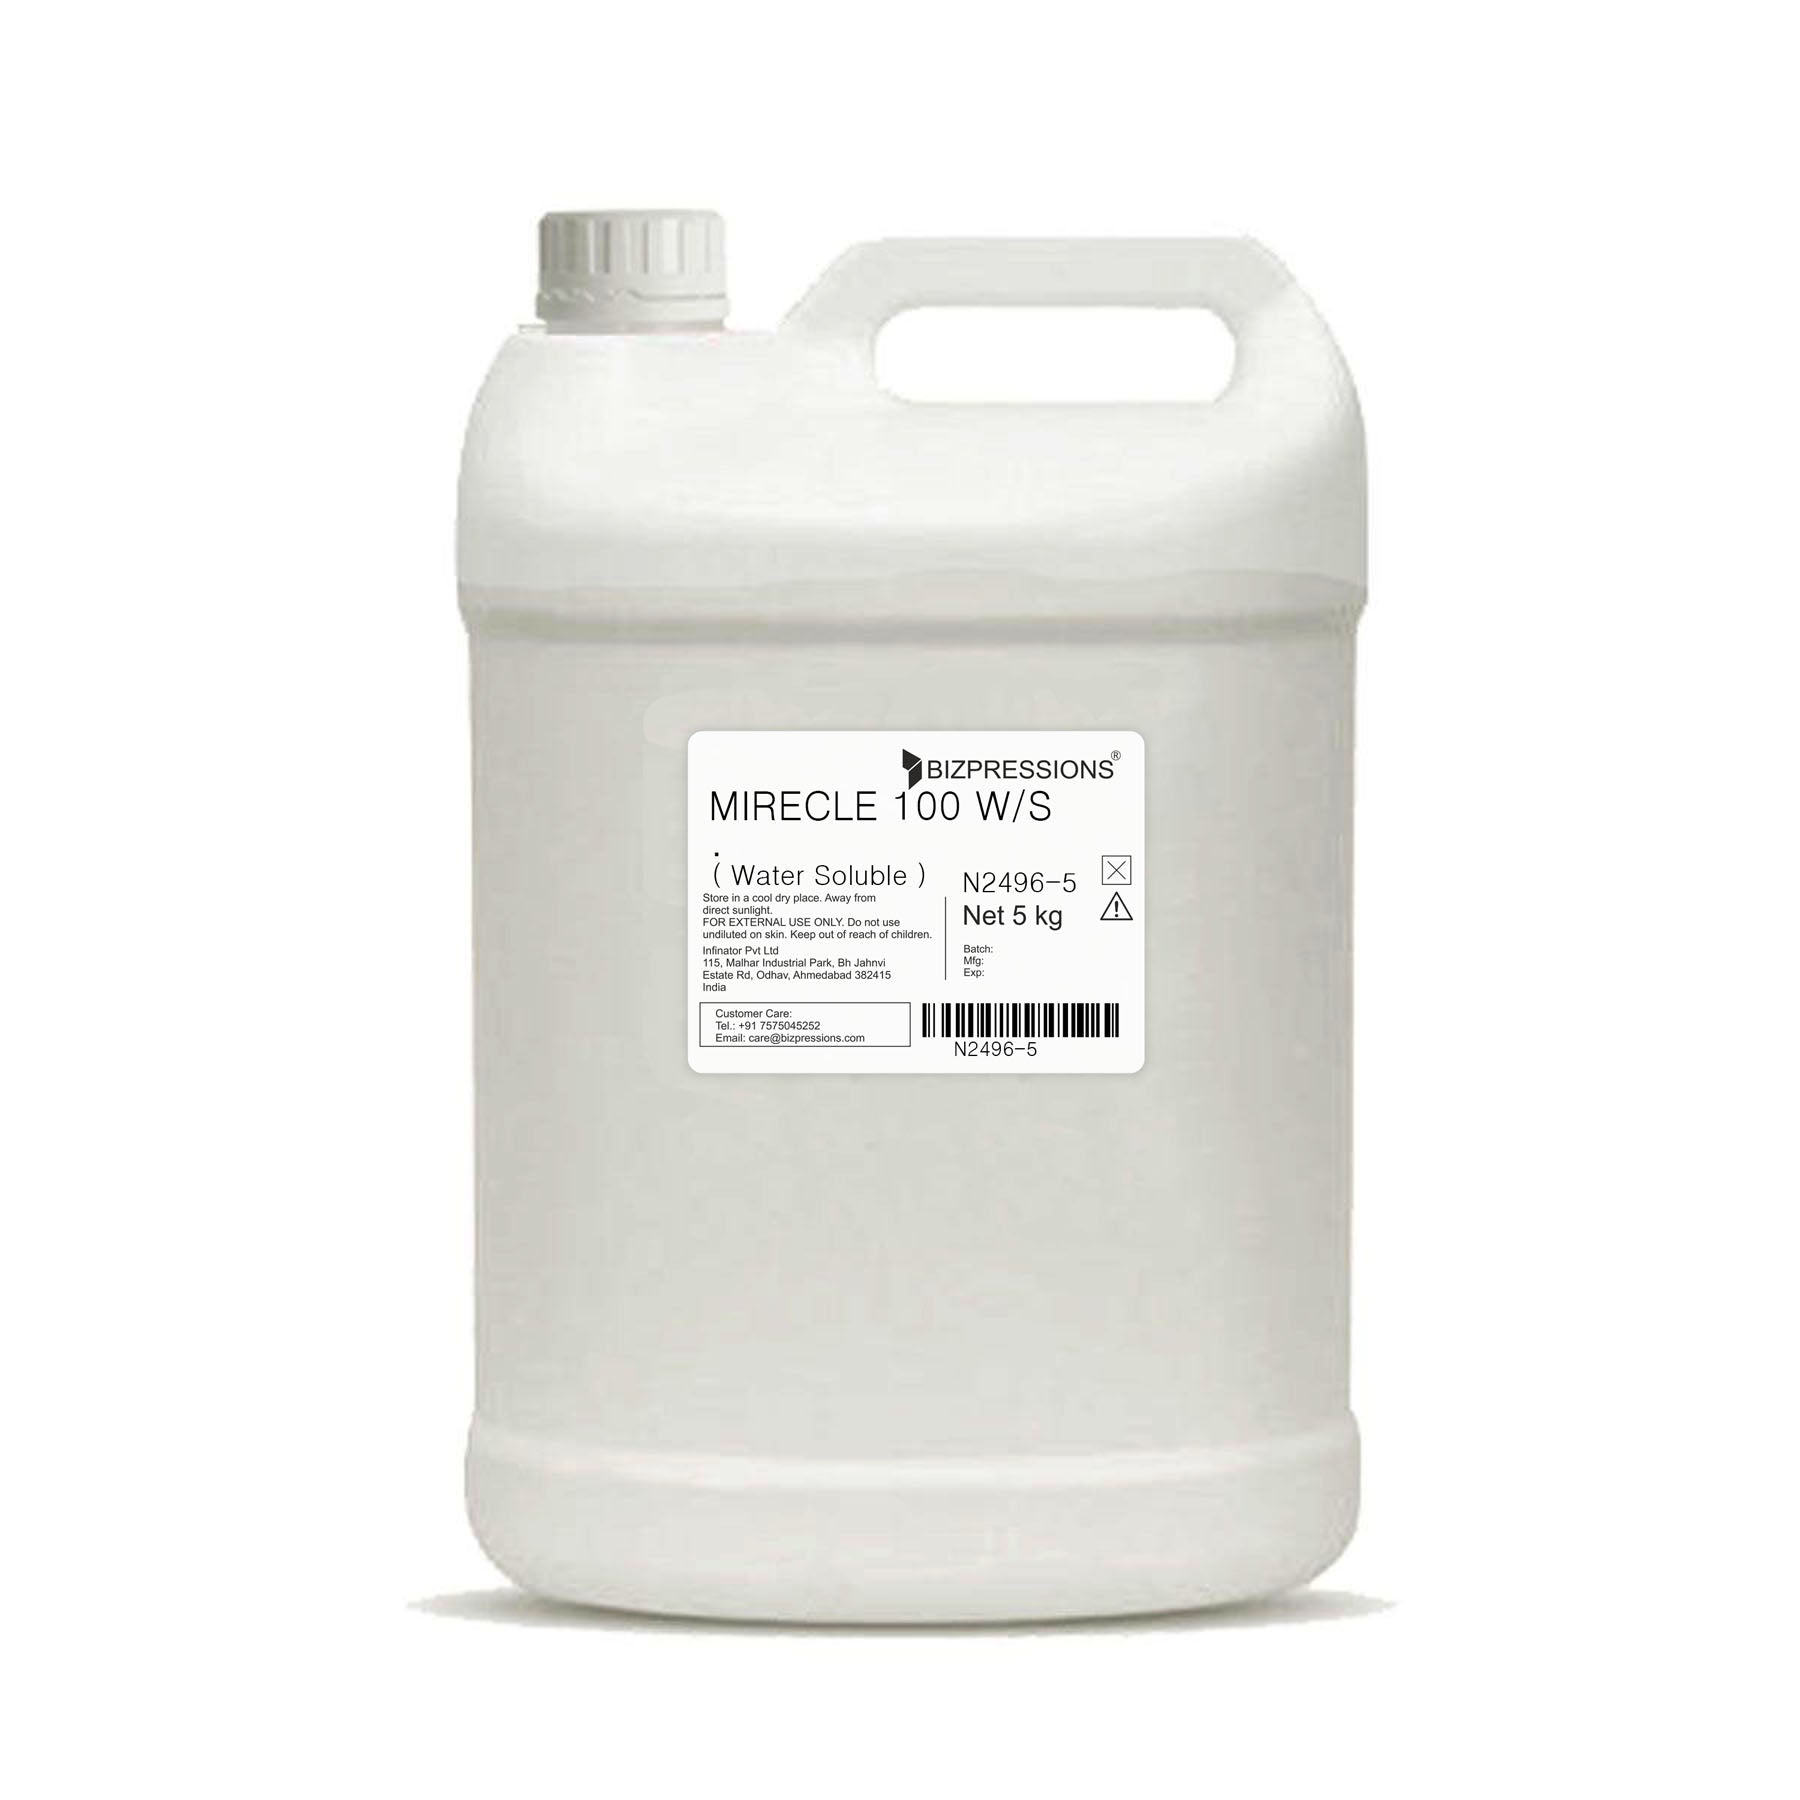 MIRECLE 100 W/S - Fragrance ( Water Soluble ) - 5 kg